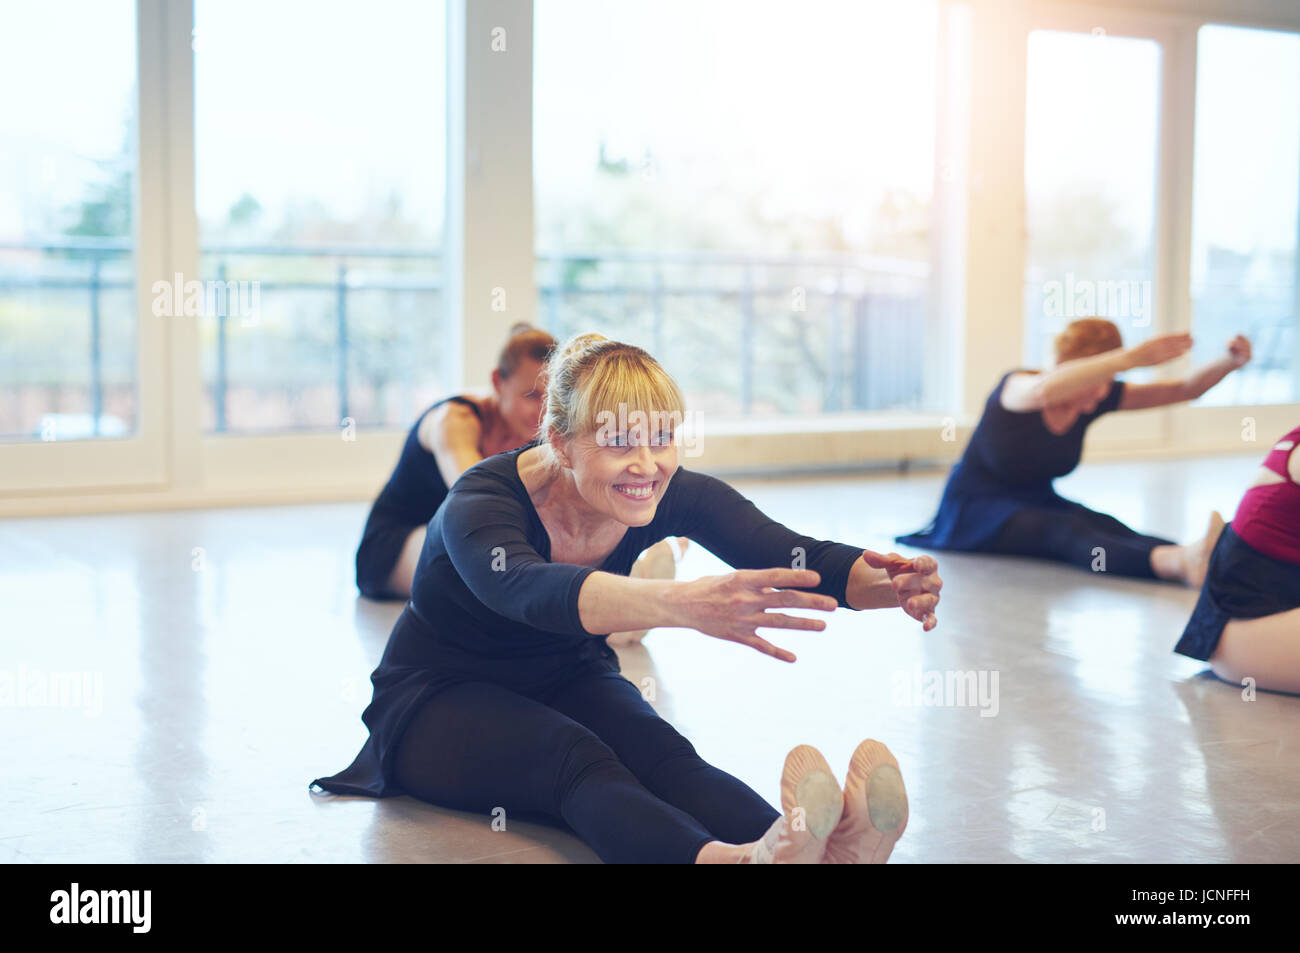 Fit smiling ballerinas sitting on floor and stretching while doing gymnastics in ballet class. Stock Photo